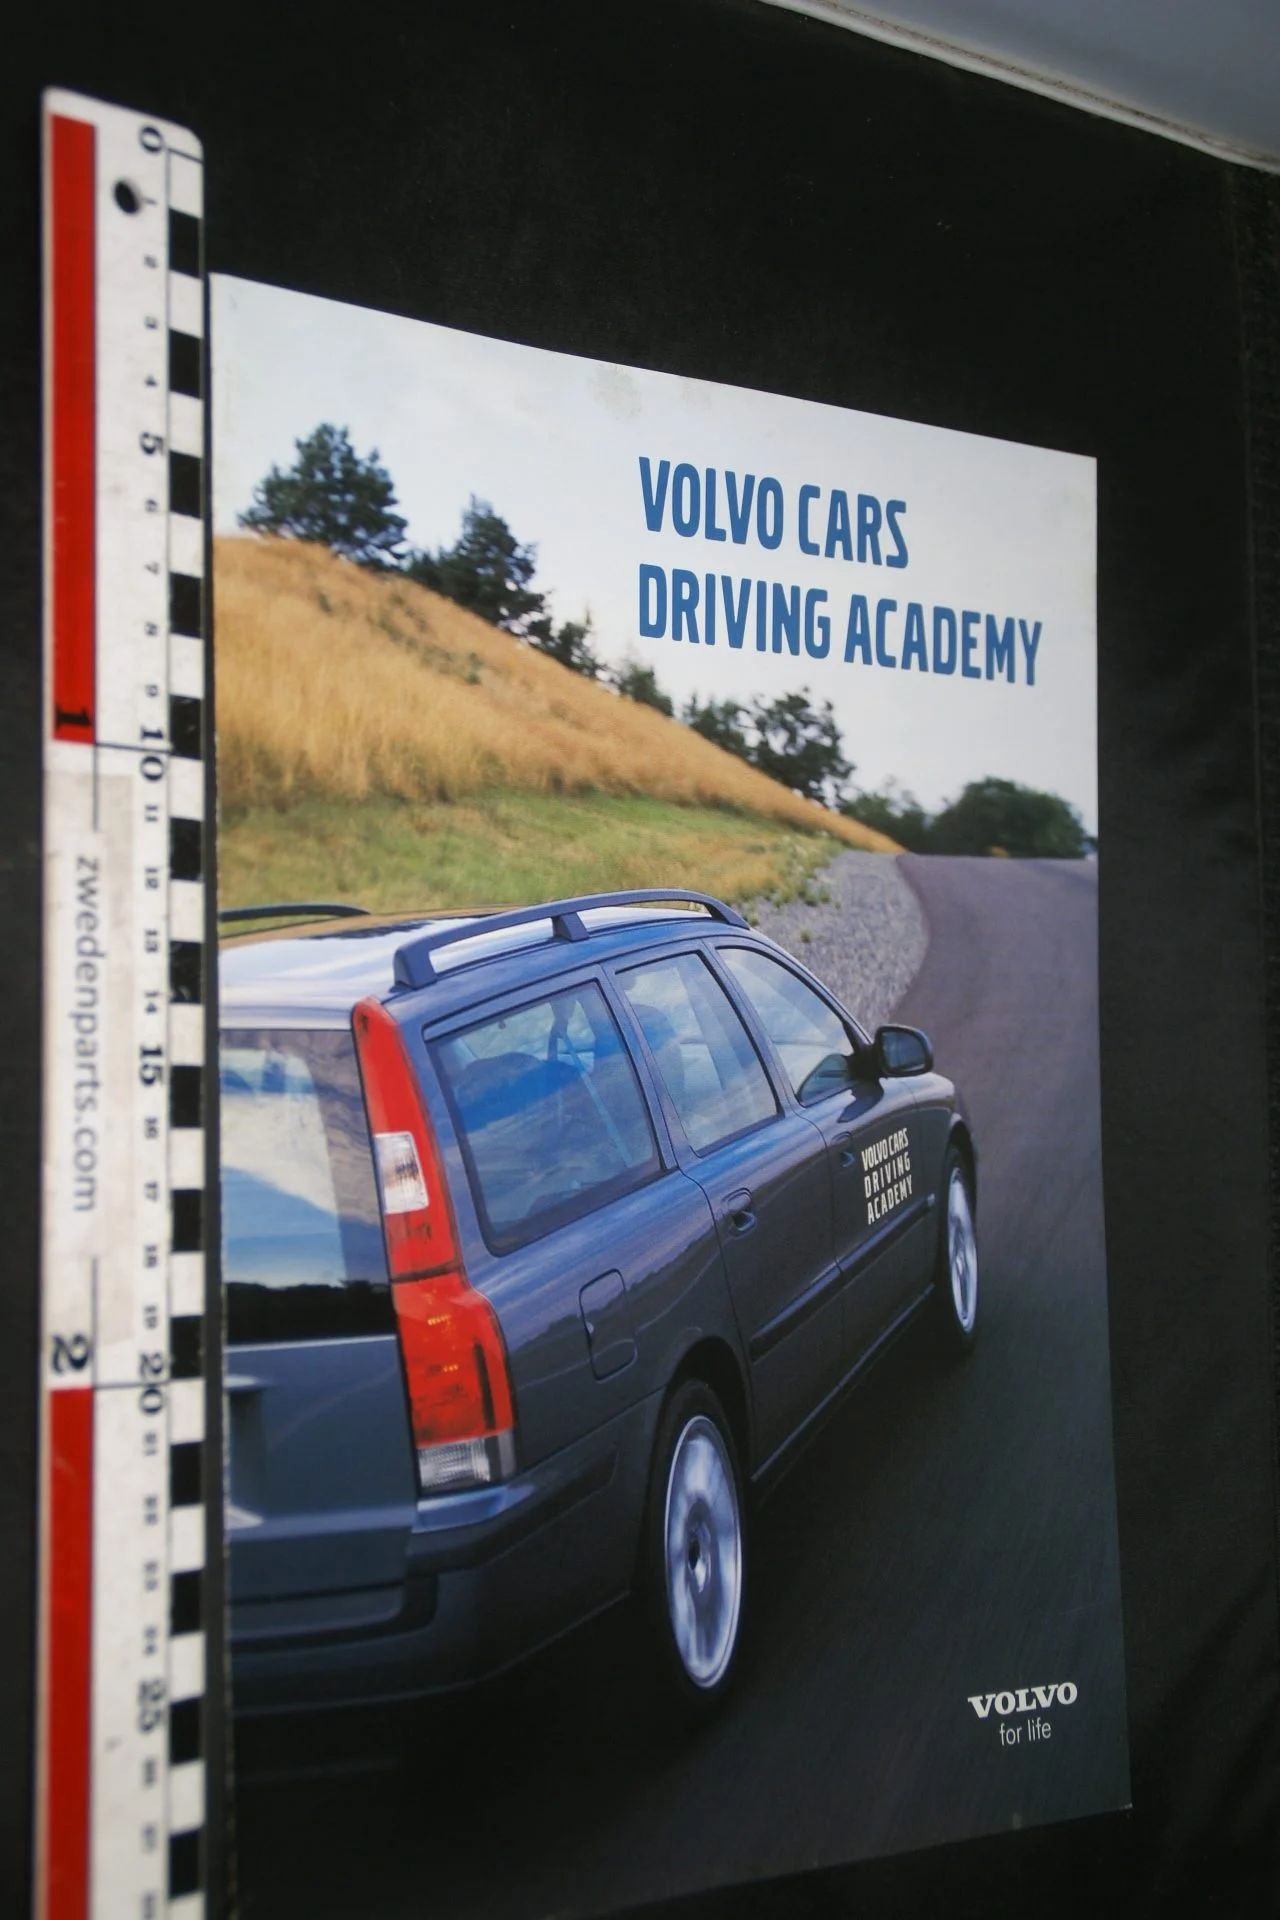 DSC03887 Brochure Volvo Driving Academy 1 rotated